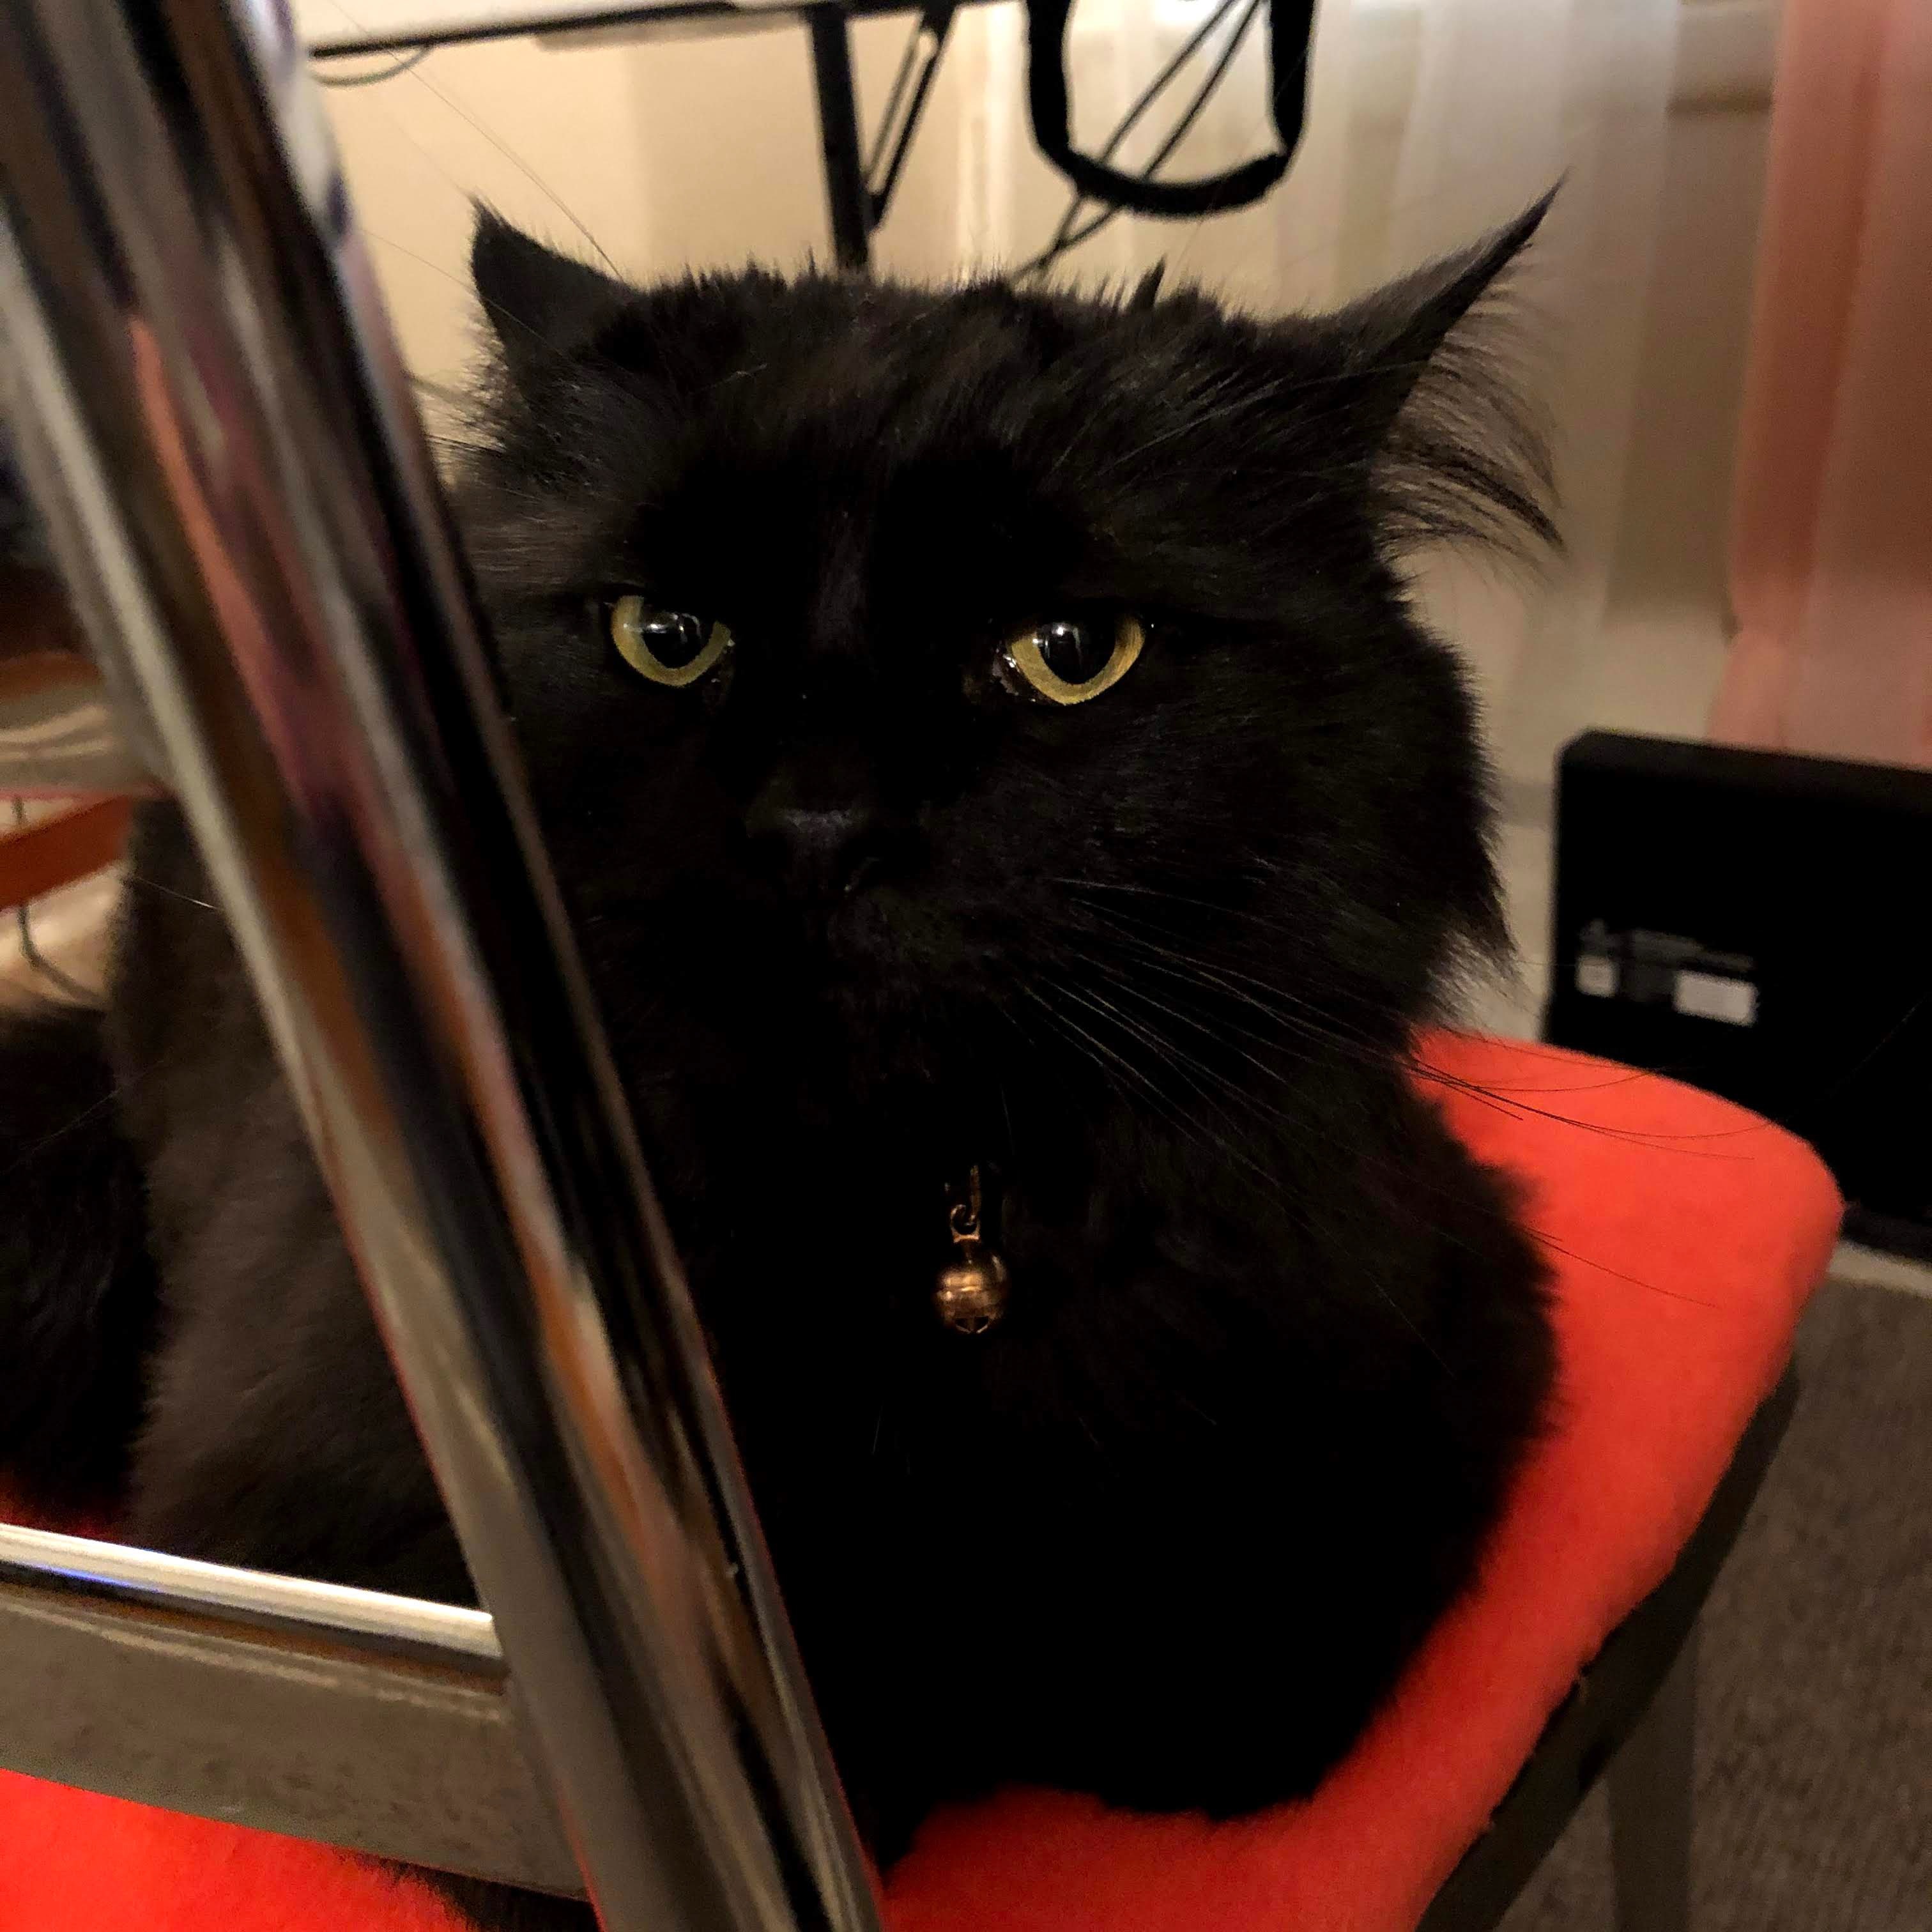 long-hair black cat that is likely plotting world domination